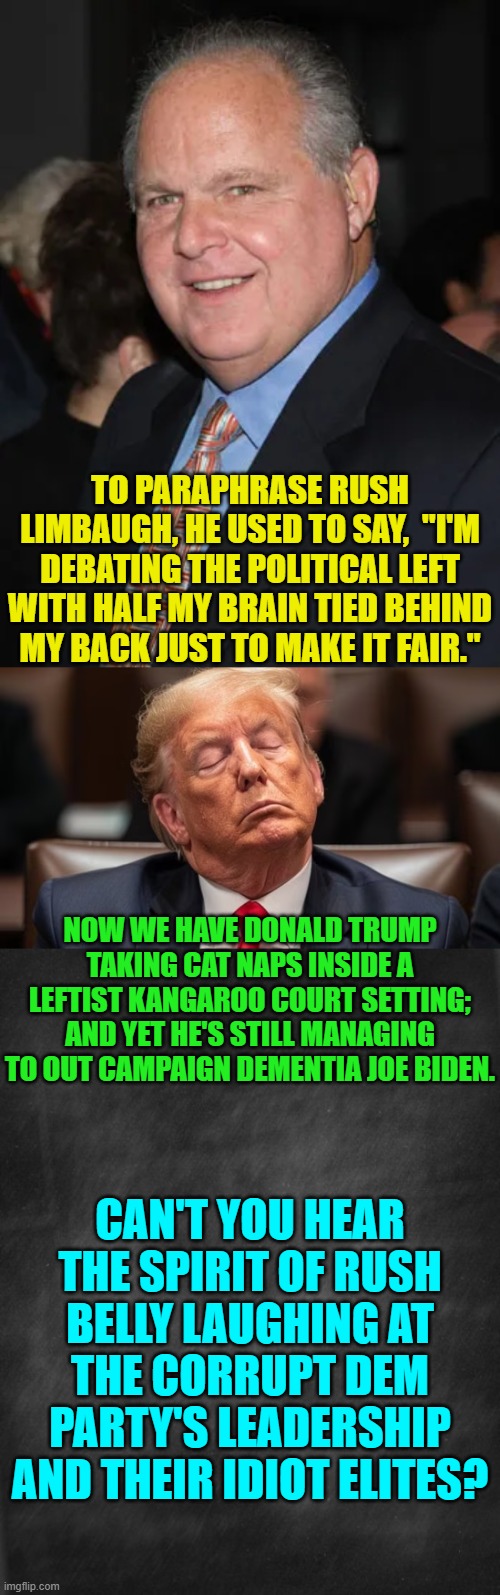 Makes you stop and think, doesn't it? | TO PARAPHRASE RUSH LIMBAUGH, HE USED TO SAY,  "I'M DEBATING THE POLITICAL LEFT WITH HALF MY BRAIN TIED BEHIND MY BACK JUST TO MAKE IT FAIR."; NOW WE HAVE DONALD TRUMP TAKING CAT NAPS INSIDE A LEFTIST KANGAROO COURT SETTING; AND YET HE'S STILL MANAGING TO OUT CAMPAIGN DEMENTIA JOE BIDEN. CAN'T YOU HEAR THE SPIRIT OF RUSH BELLY LAUGHING AT THE CORRUPT DEM PARTY'S LEADERSHIP AND THEIR IDIOT ELITES? | image tagged in yep | made w/ Imgflip meme maker